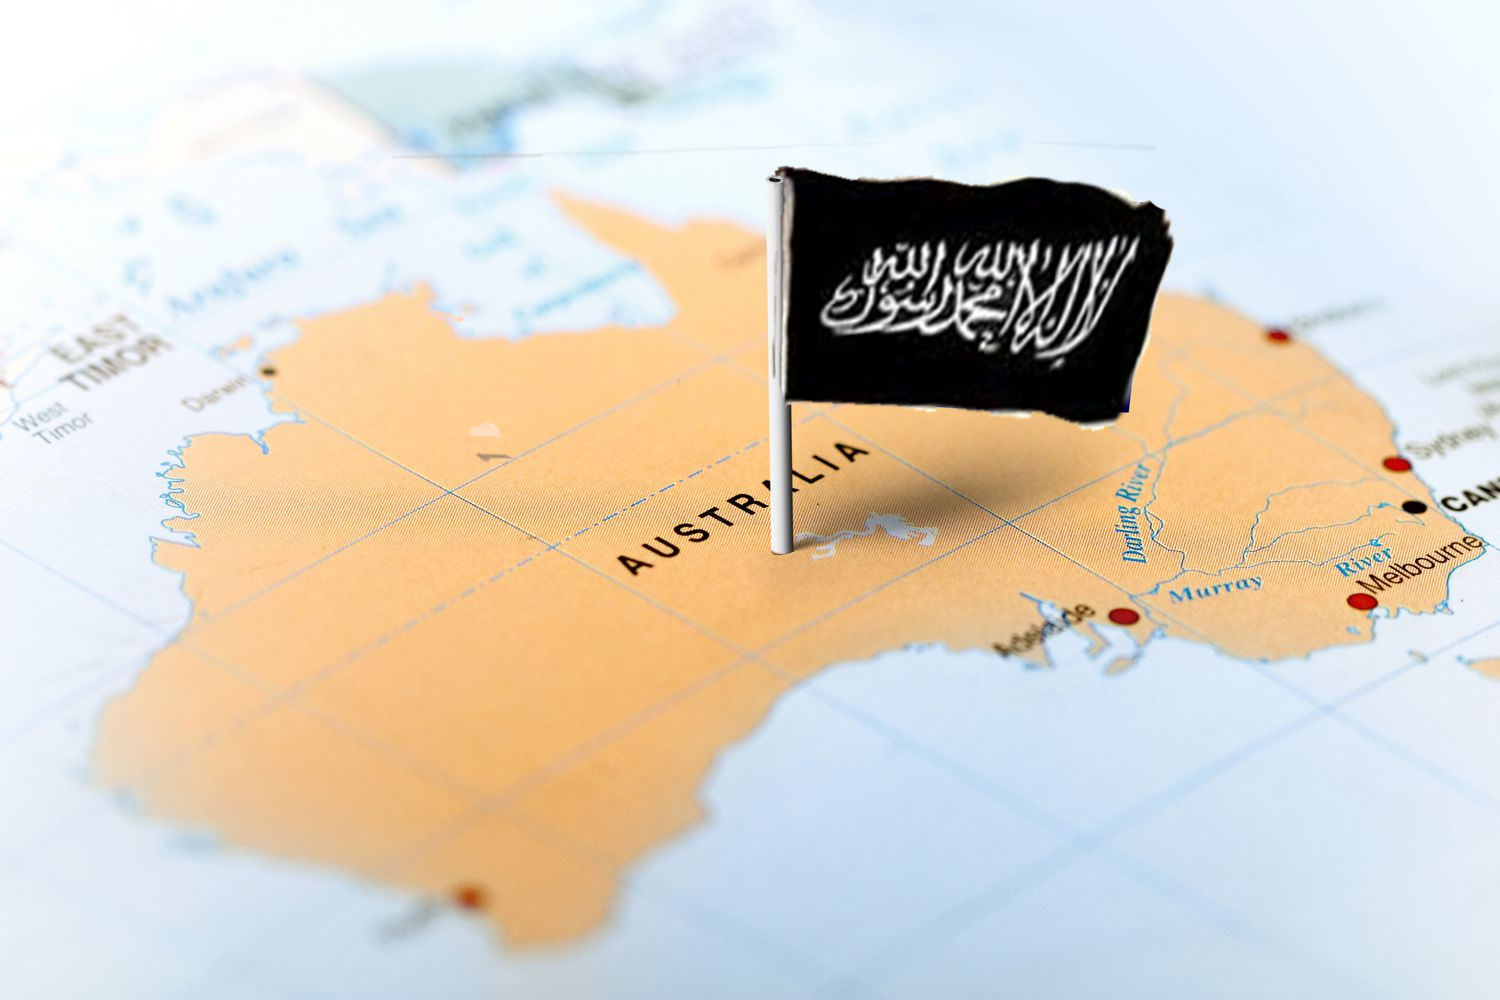 Beware of the imminent danger of turning Australia into an Islamic state